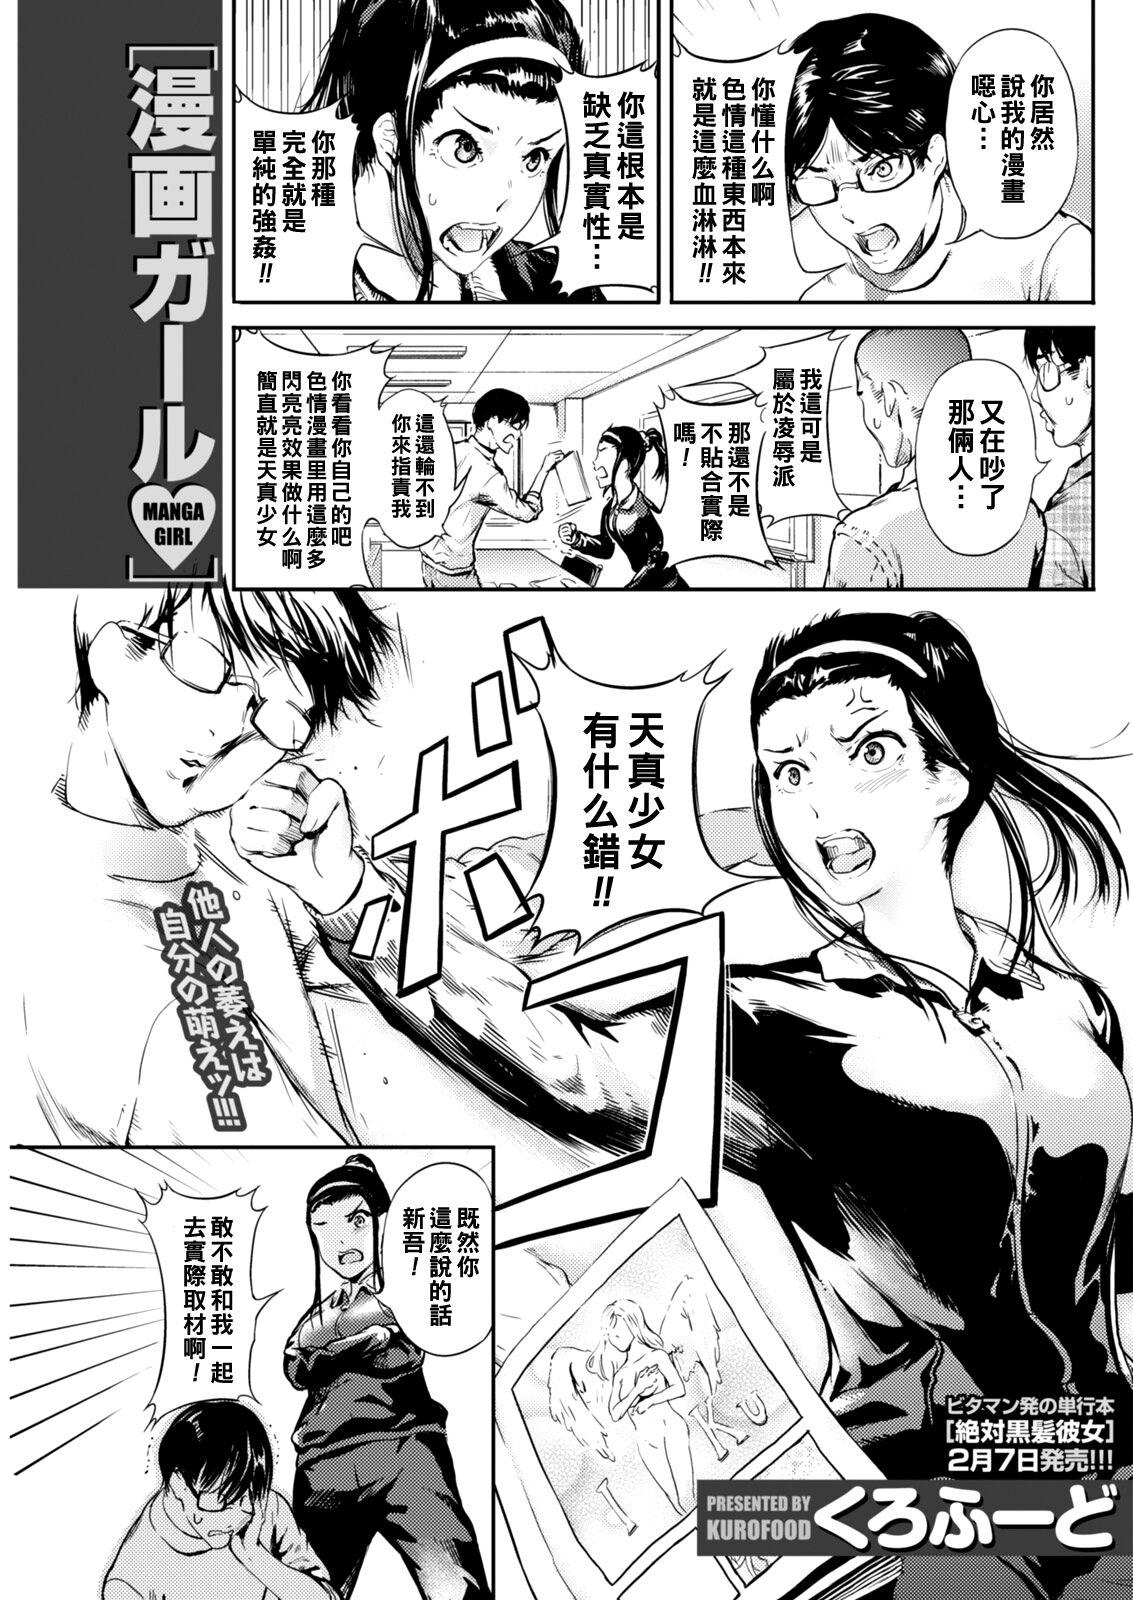 Anal Play 漫画ガール（Chinese） Tanned - Page 1